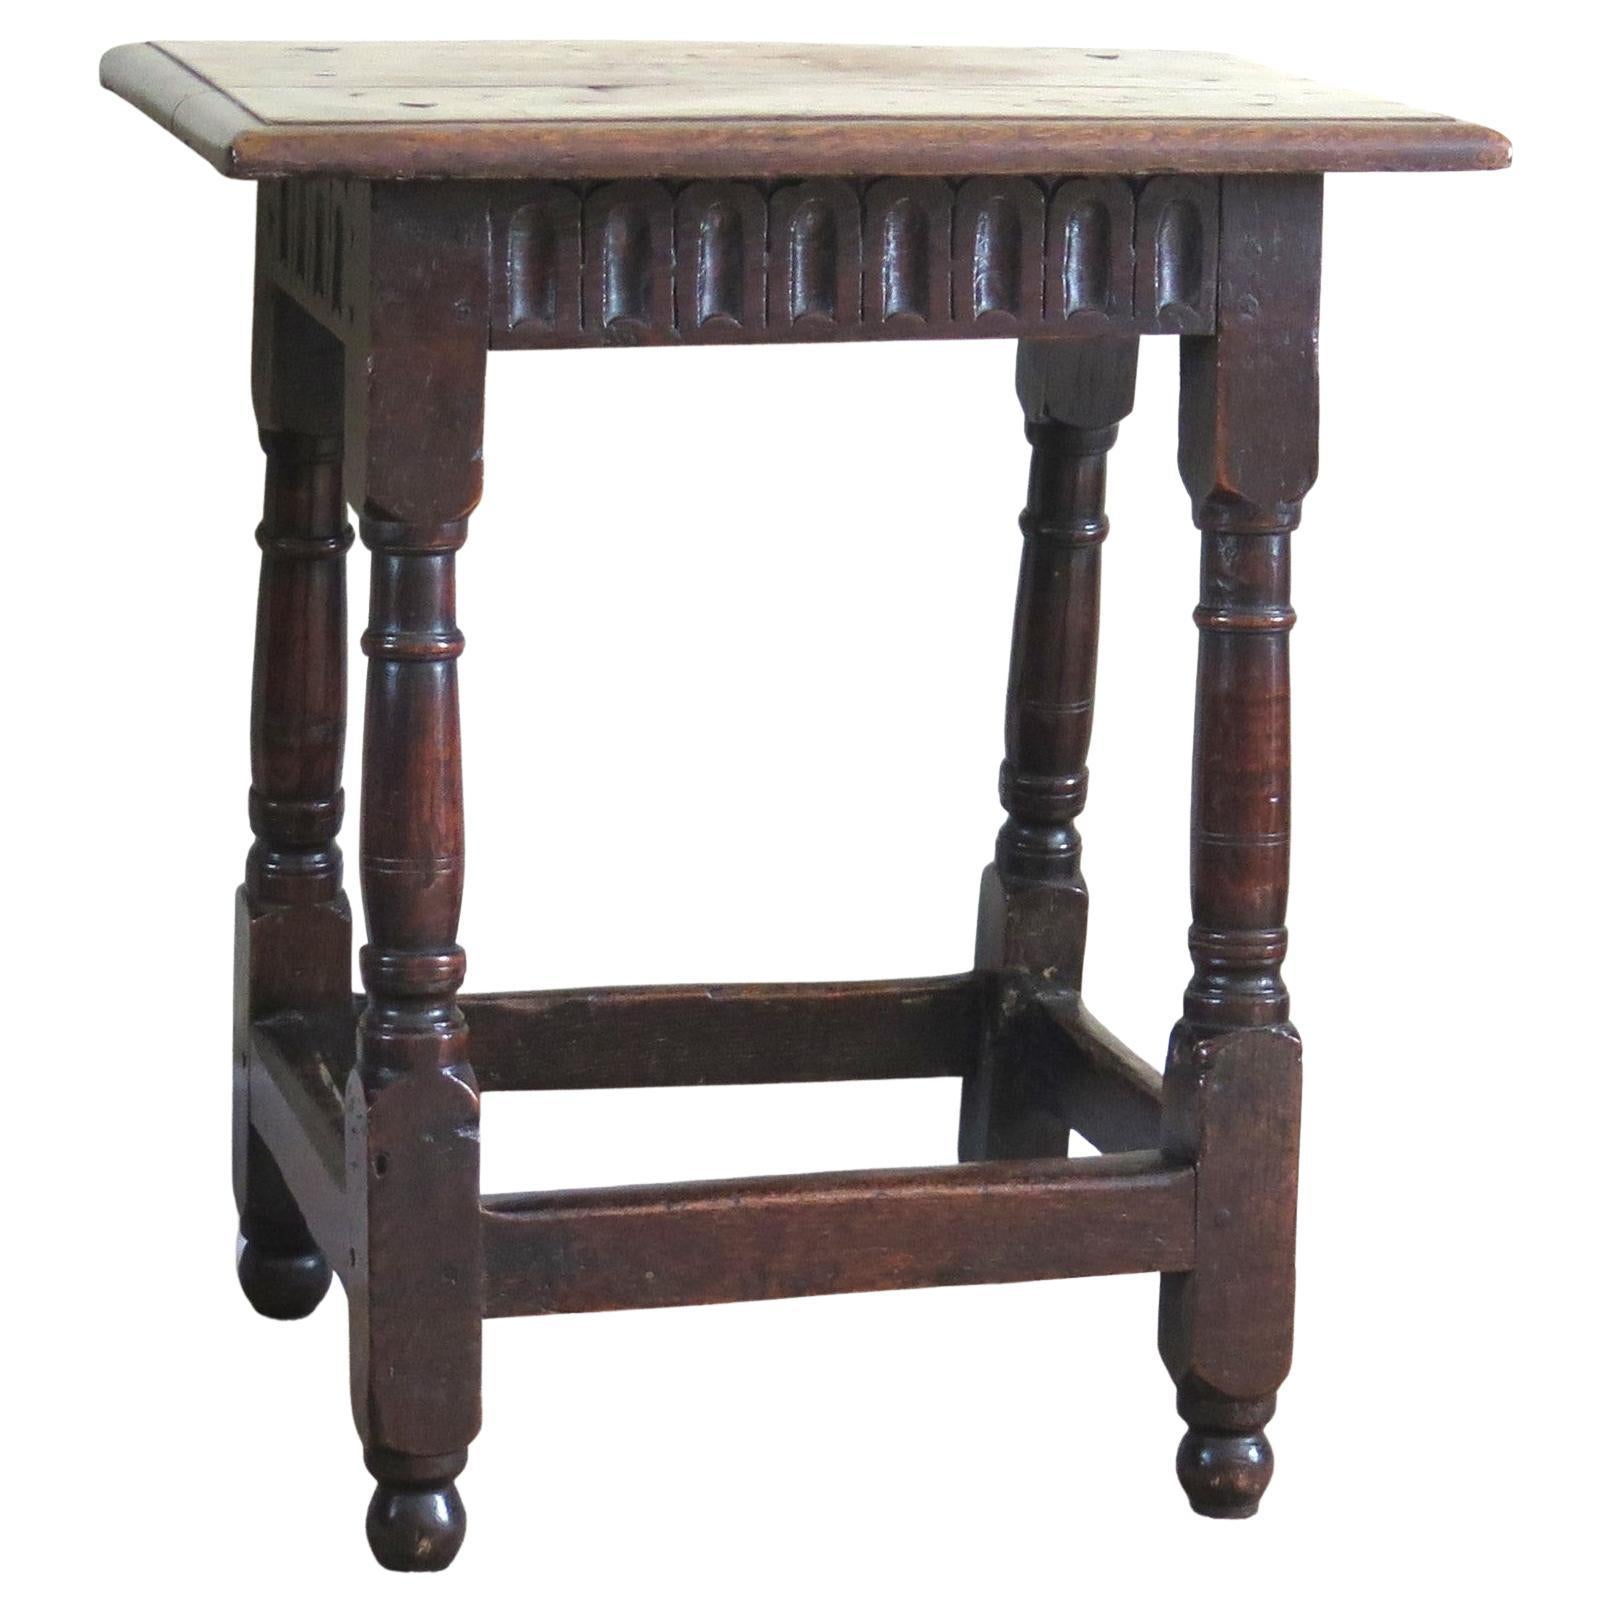 Charles 1st English Jointed Stool Oak, Early to Mid 17th Century, circa 1630 For Sale